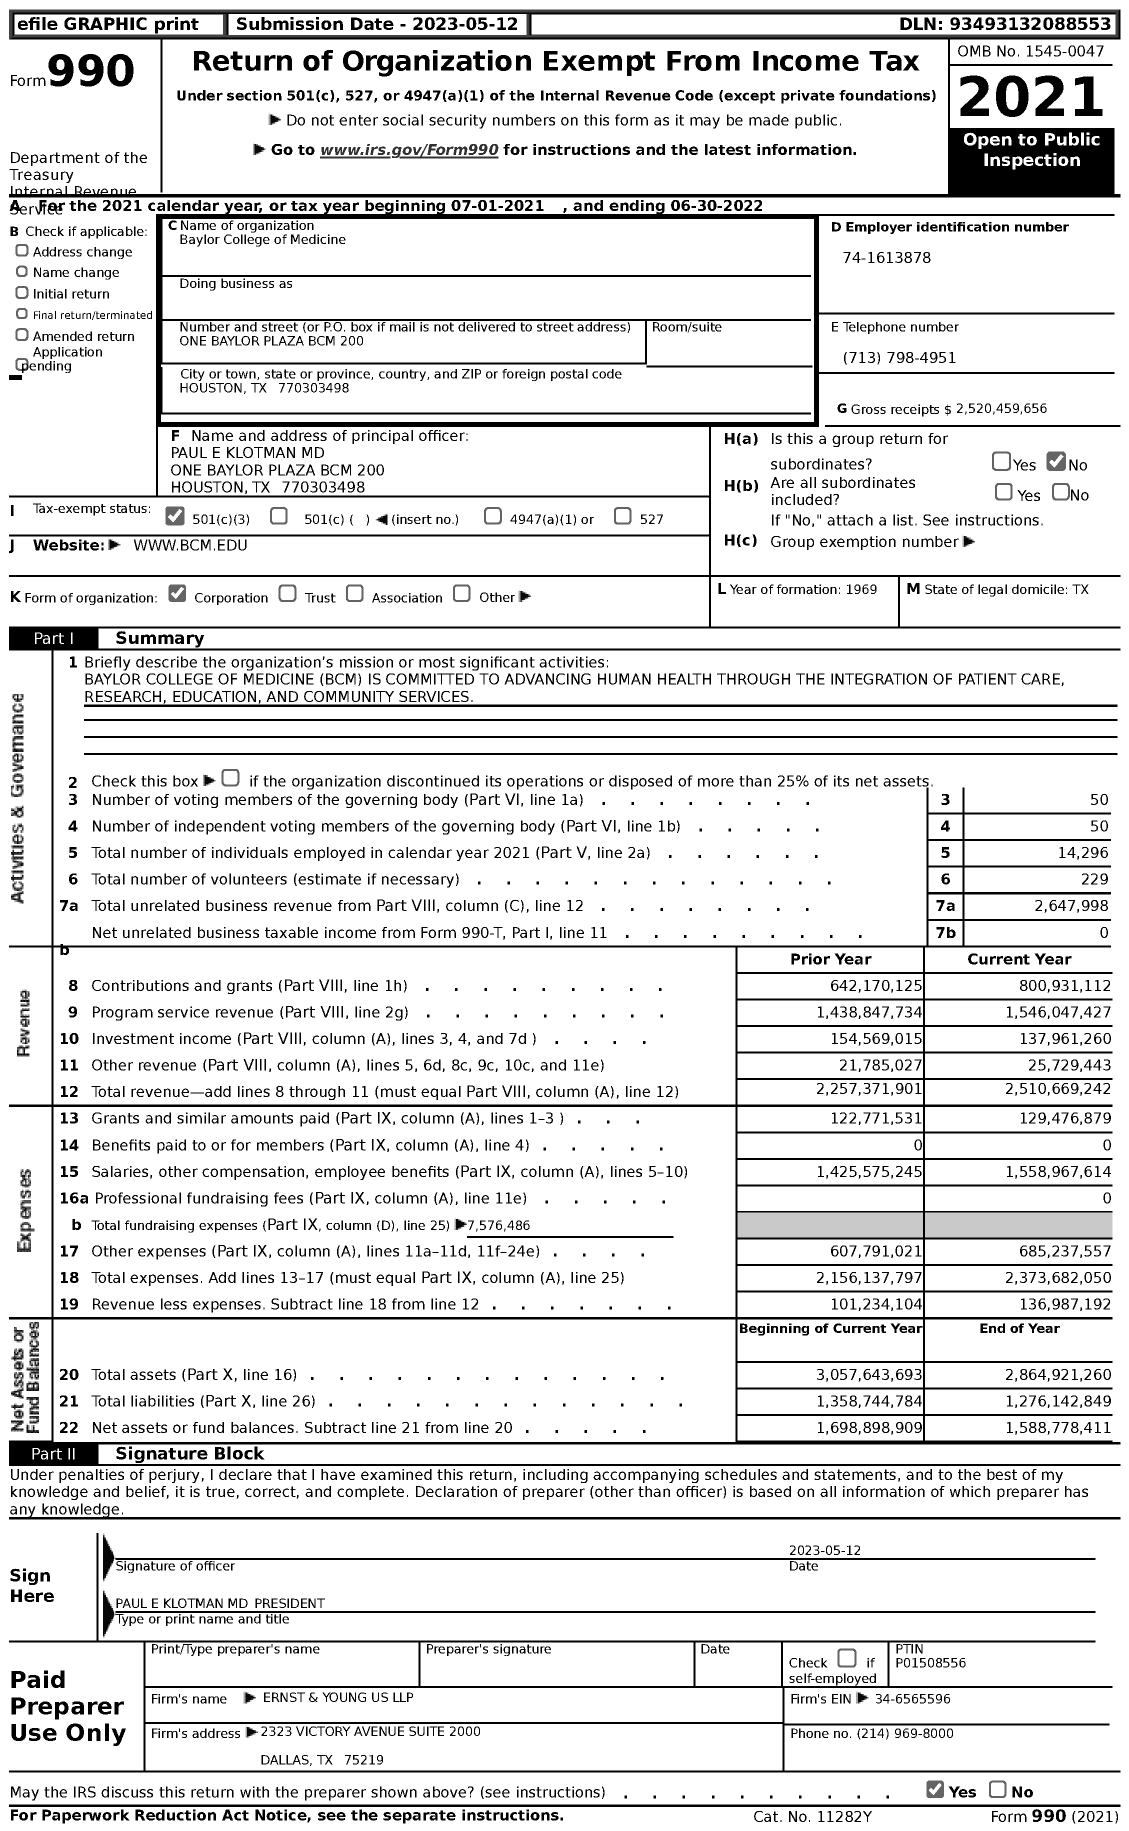 Image of first page of 2021 Form 990 for Baylor College of Medicine (BCM)